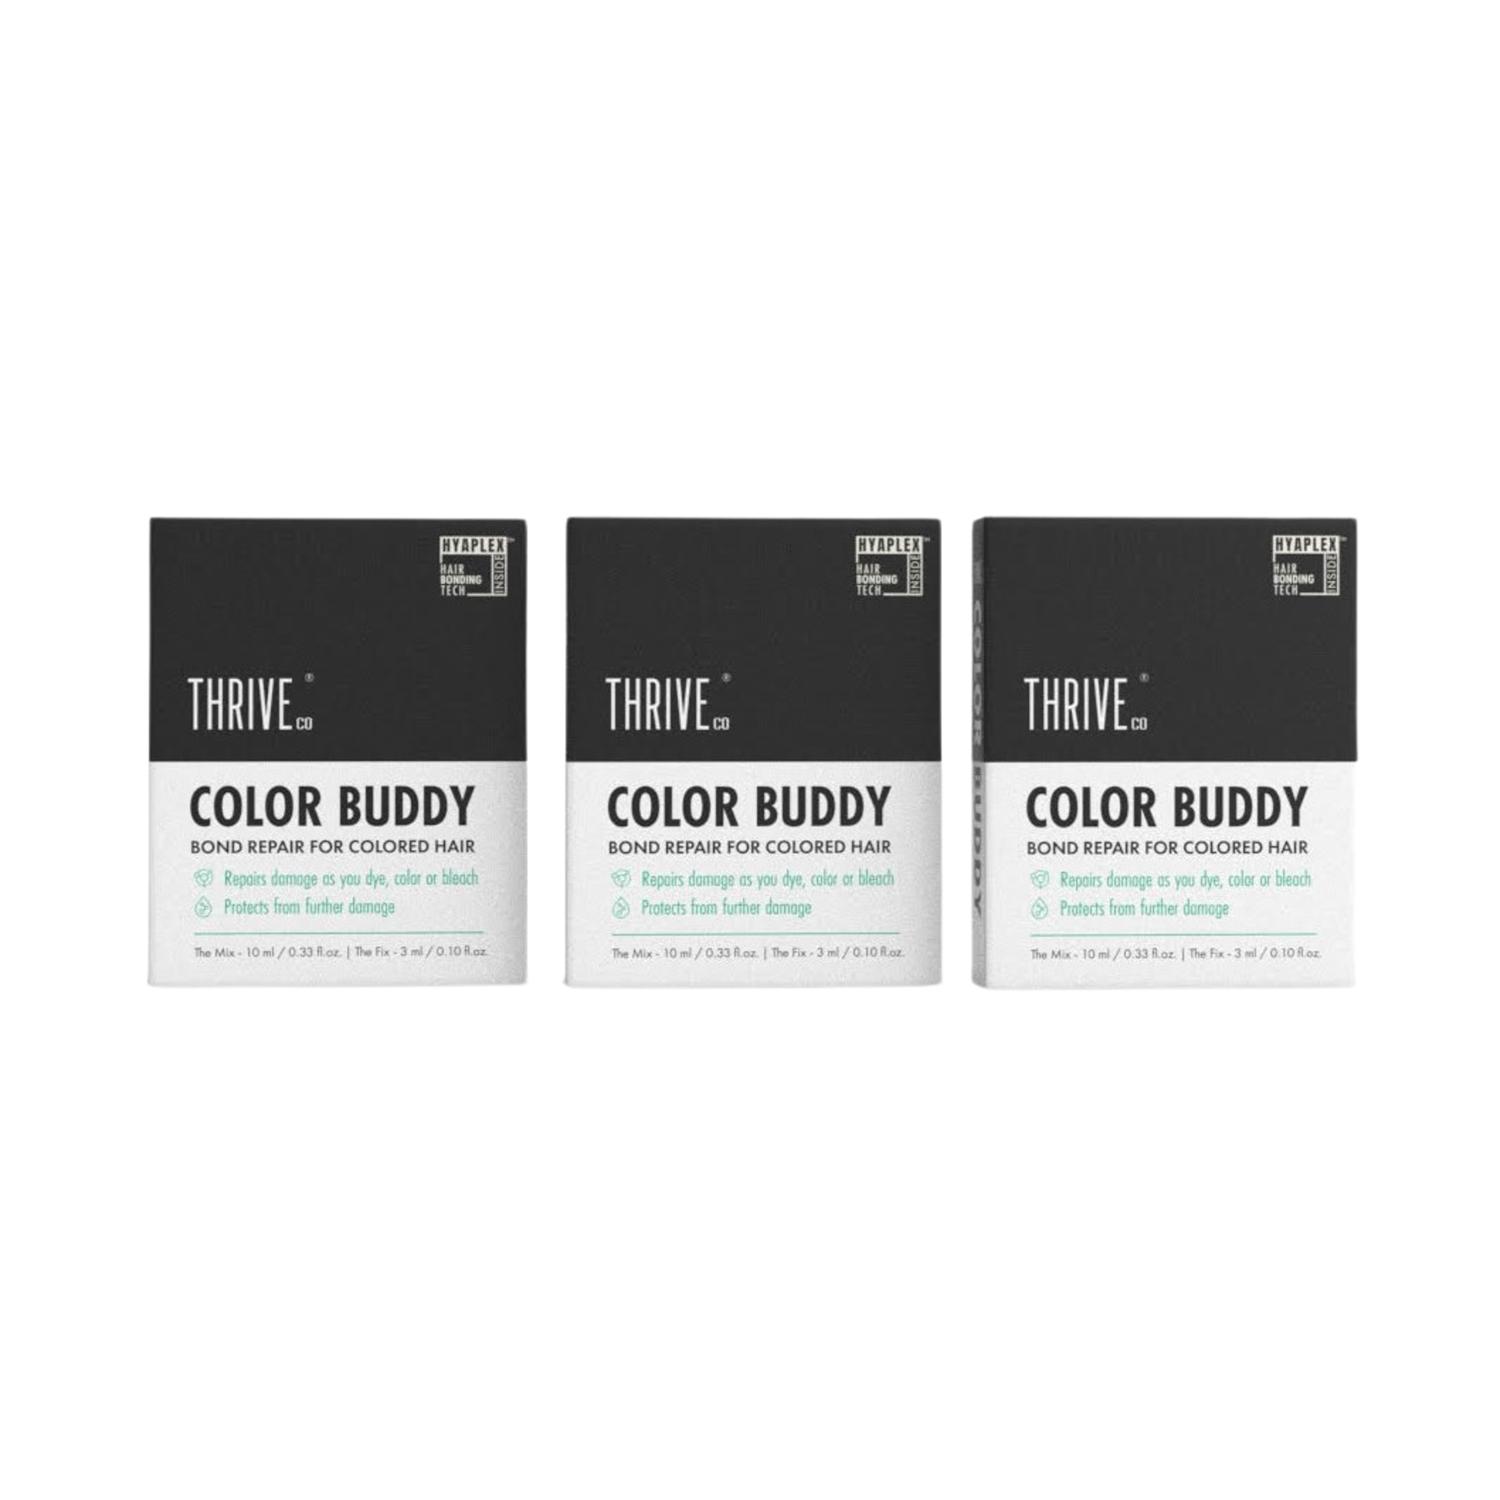 Thriveco | Thriveco Color Buddy Bond Repair For Colored Hair (13ml)